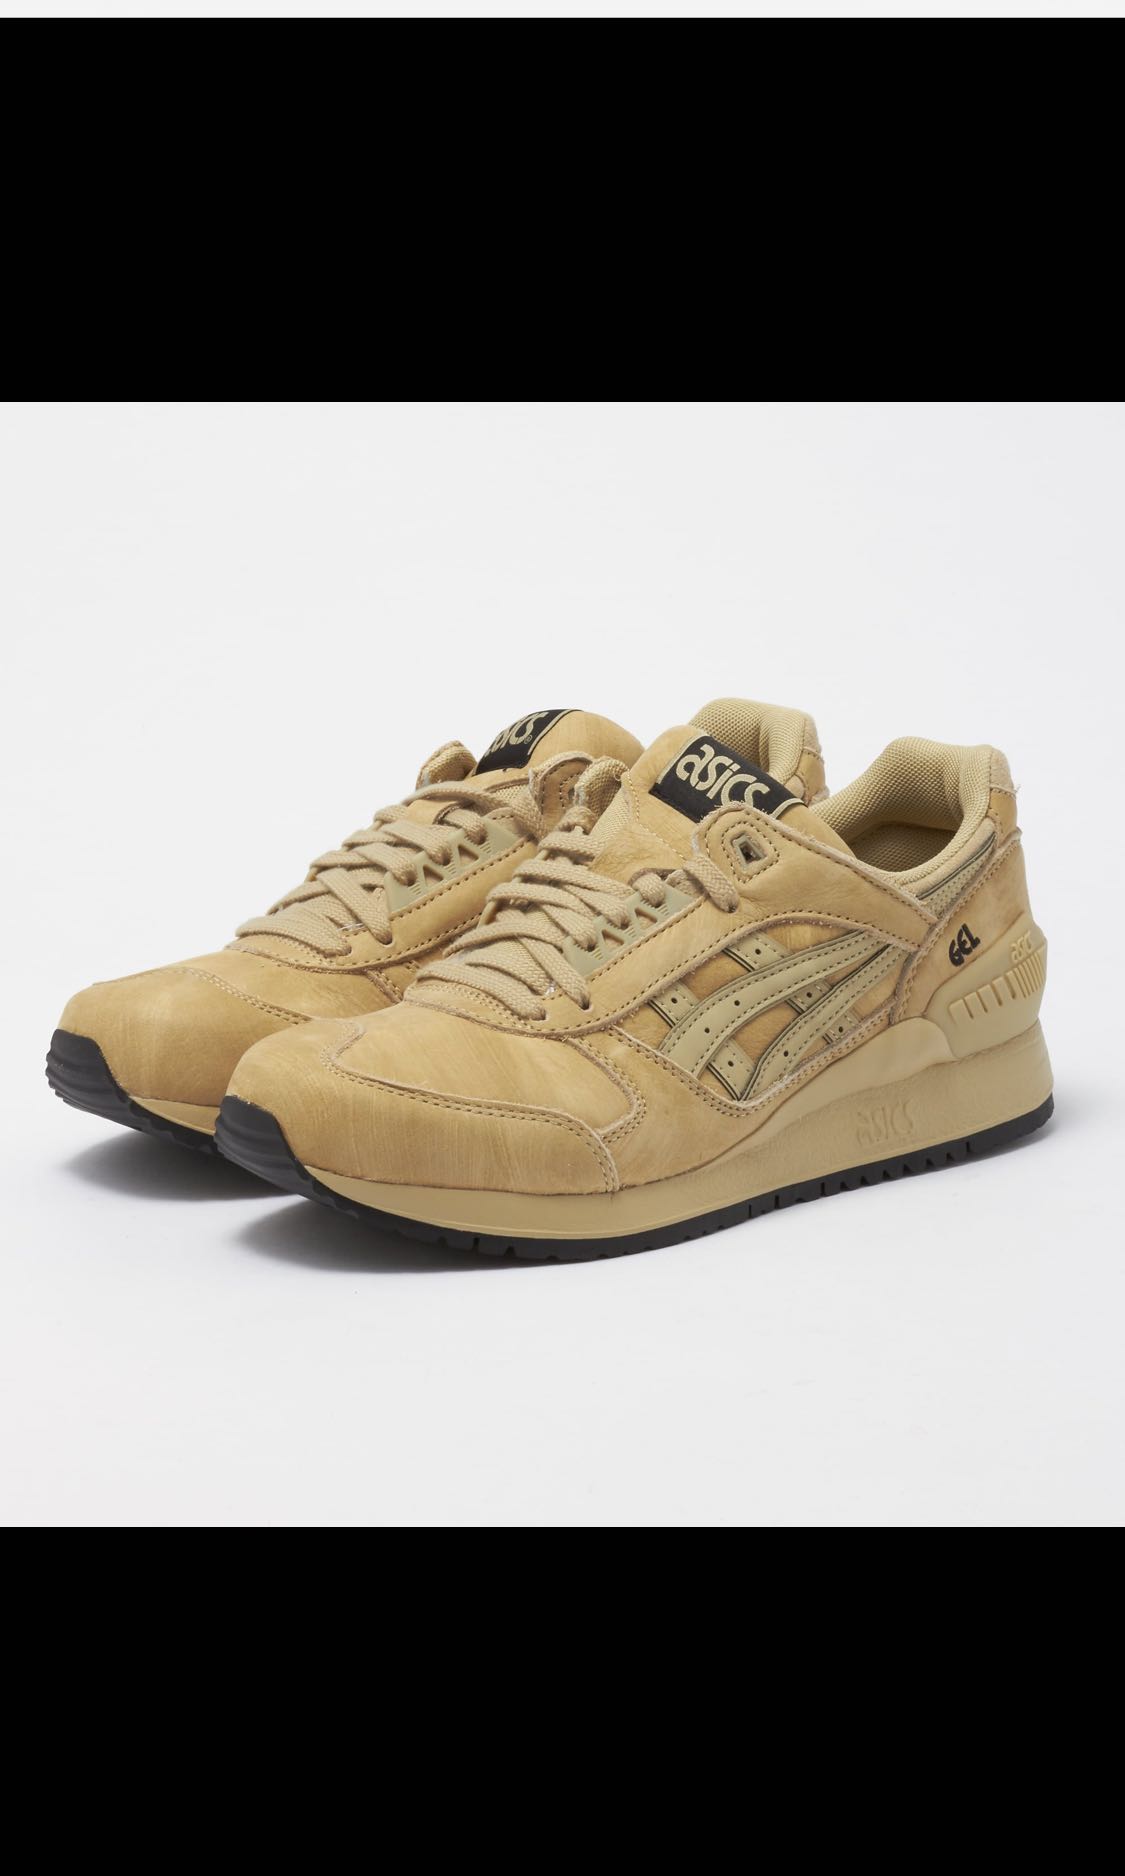 Molesto Fantástico director Asics onitsuka tiger gel-respector taos taupe color sneakers casual fashion  sports shoe, Men's Fashion, Footwear, Sneakers on Carousell